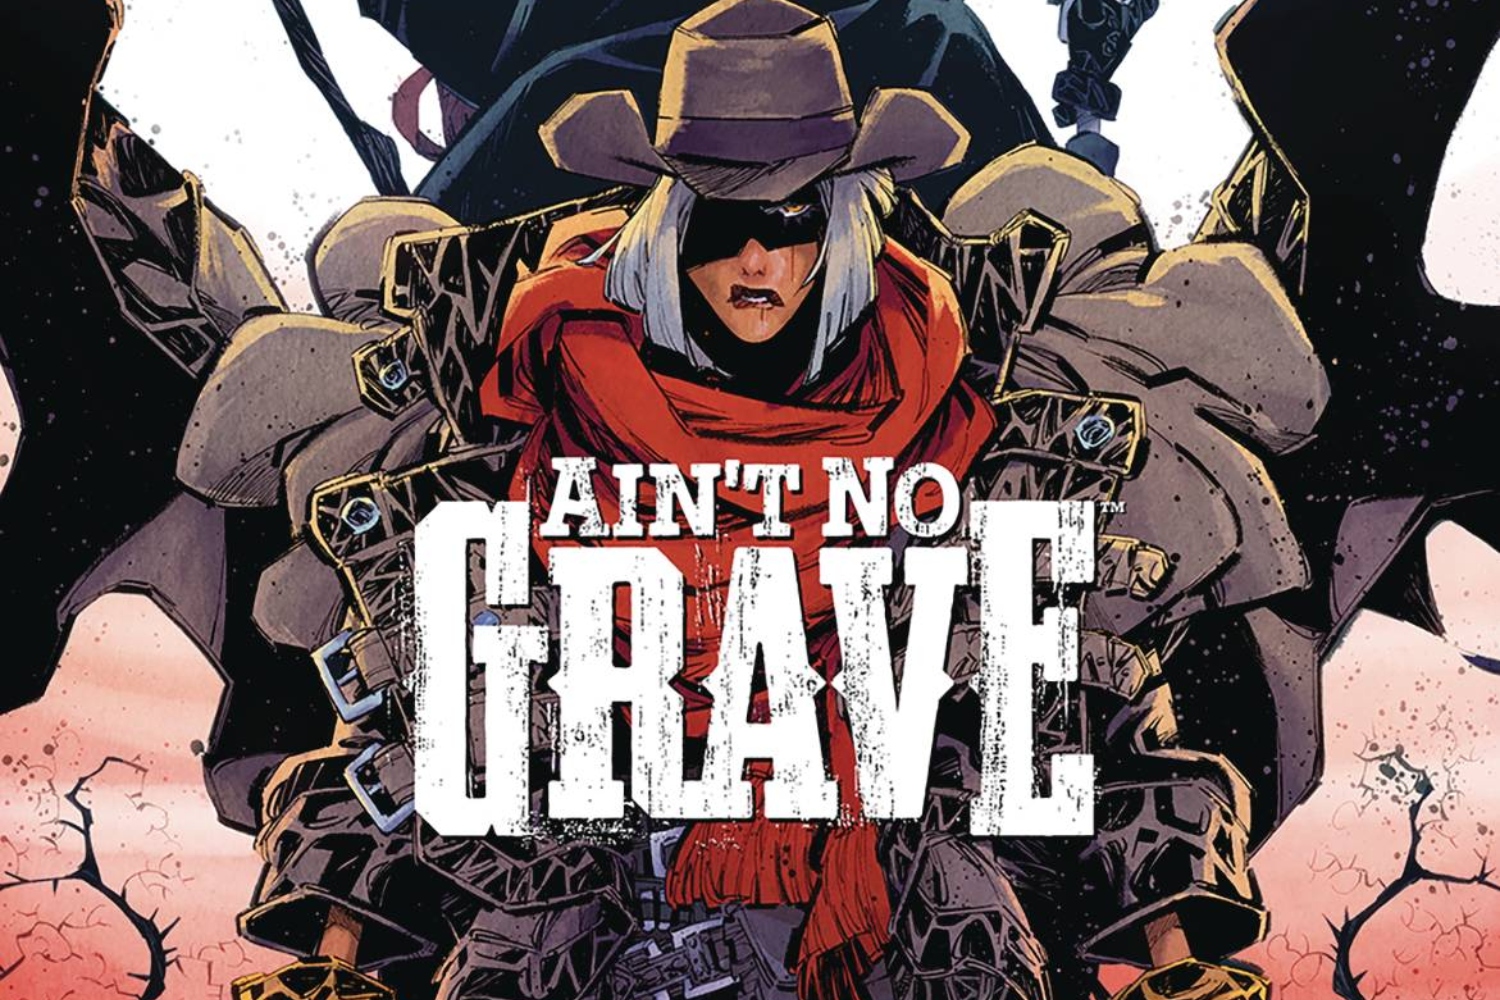 'Ain't No Grave' #1 is a slightly uneven start to a hugely exciting desert sojourn